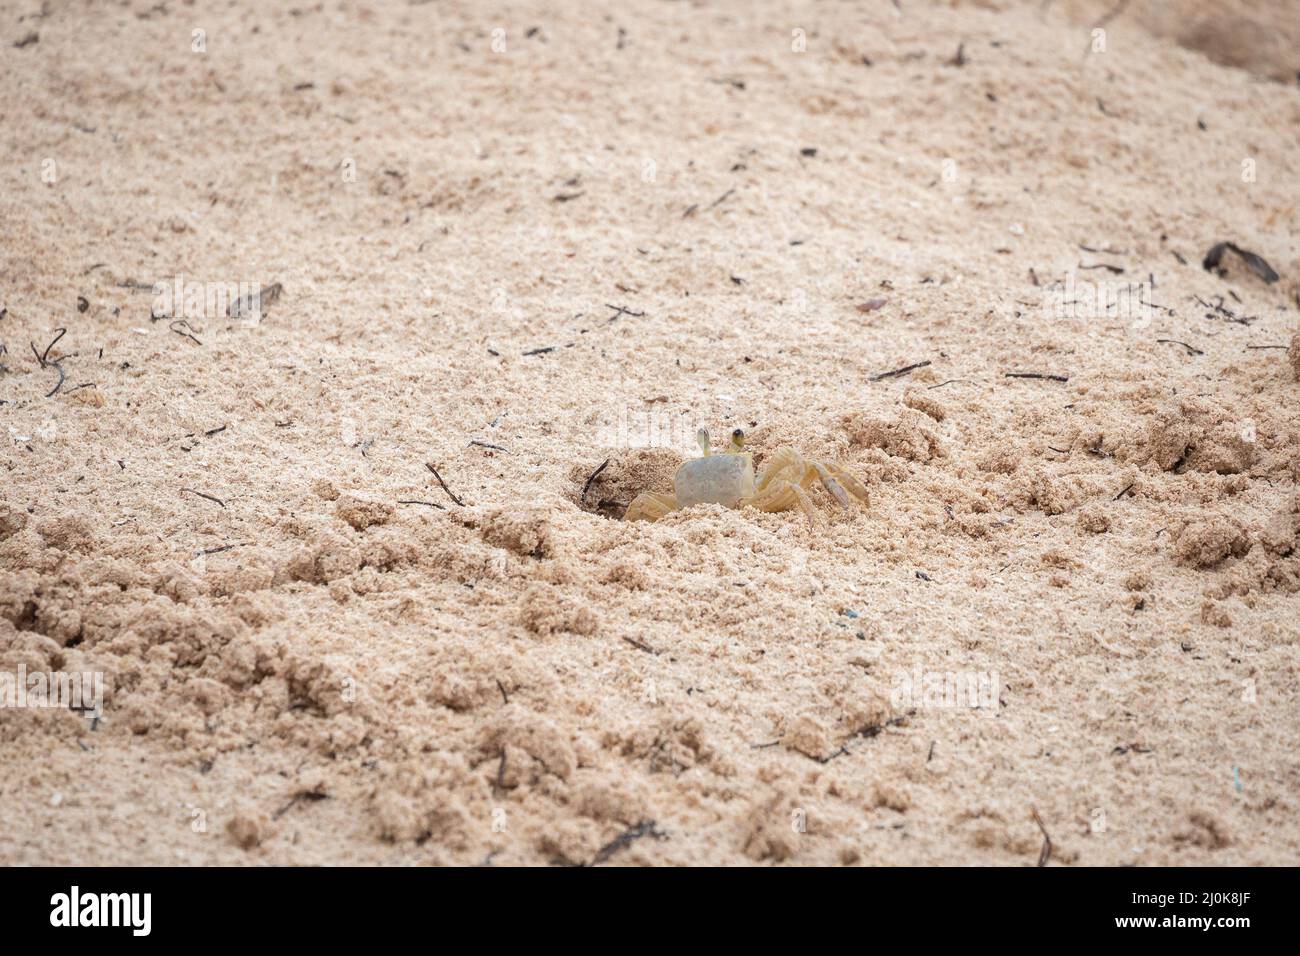 White Crab Digging out Sand to Make a Deeper Hole Stock Photo